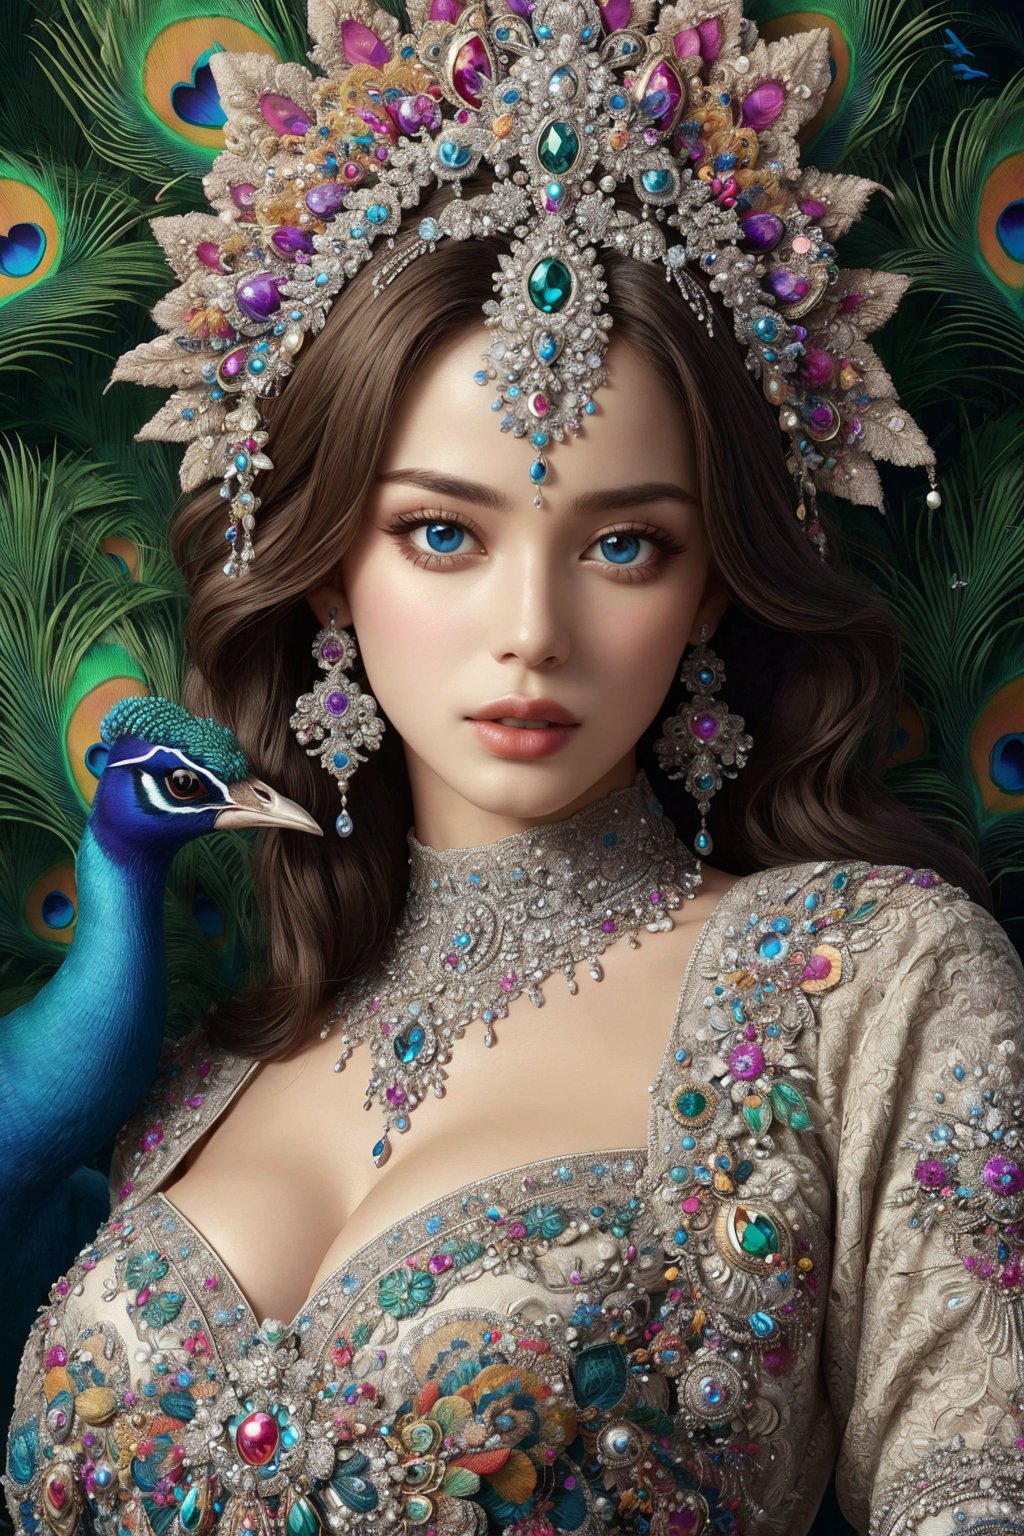 busty and sexy girl, 8k, masterpiece, ultra-realistic, best quality, high resolution, high definition, Peacock feather, hair ornament, jewelry, earrings, necklace, headdress, gem, pearl, peacock feather, colorful, intricate details